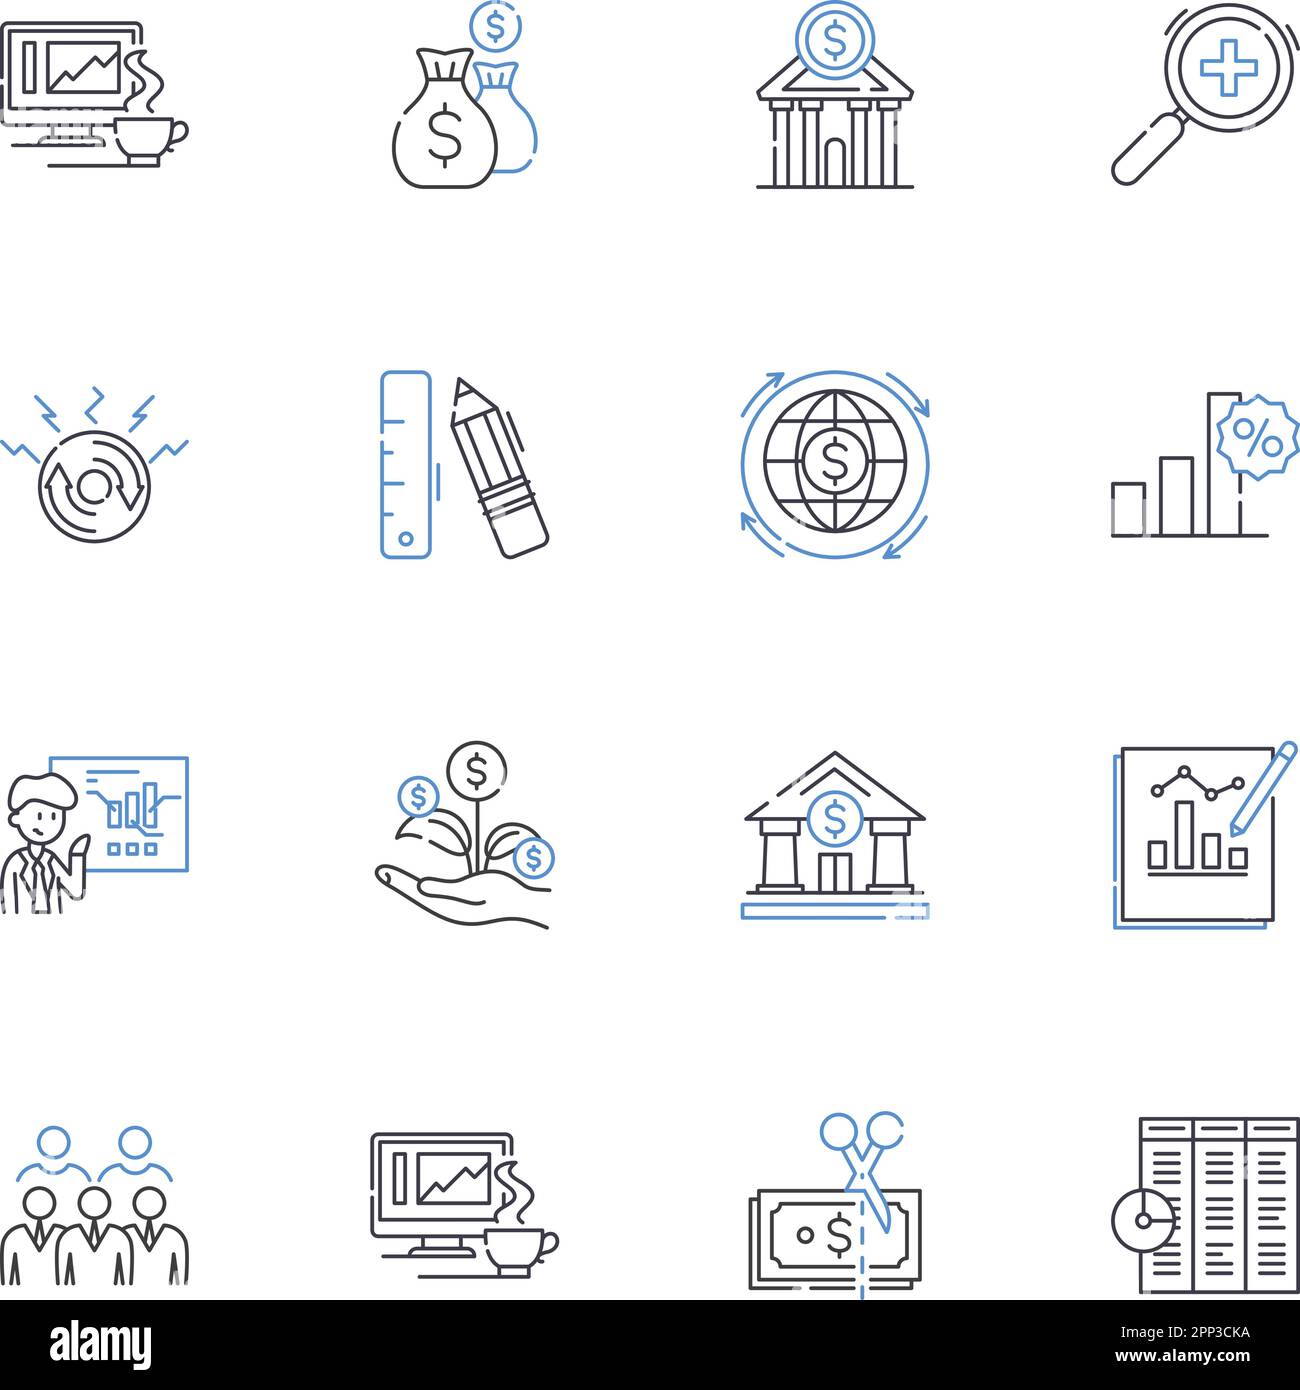 Large-cap funds line icons collection. Blue-chip, Growth, Value, Stability, Quality, Diversification, Performance vector and linear illustration Stock Vector